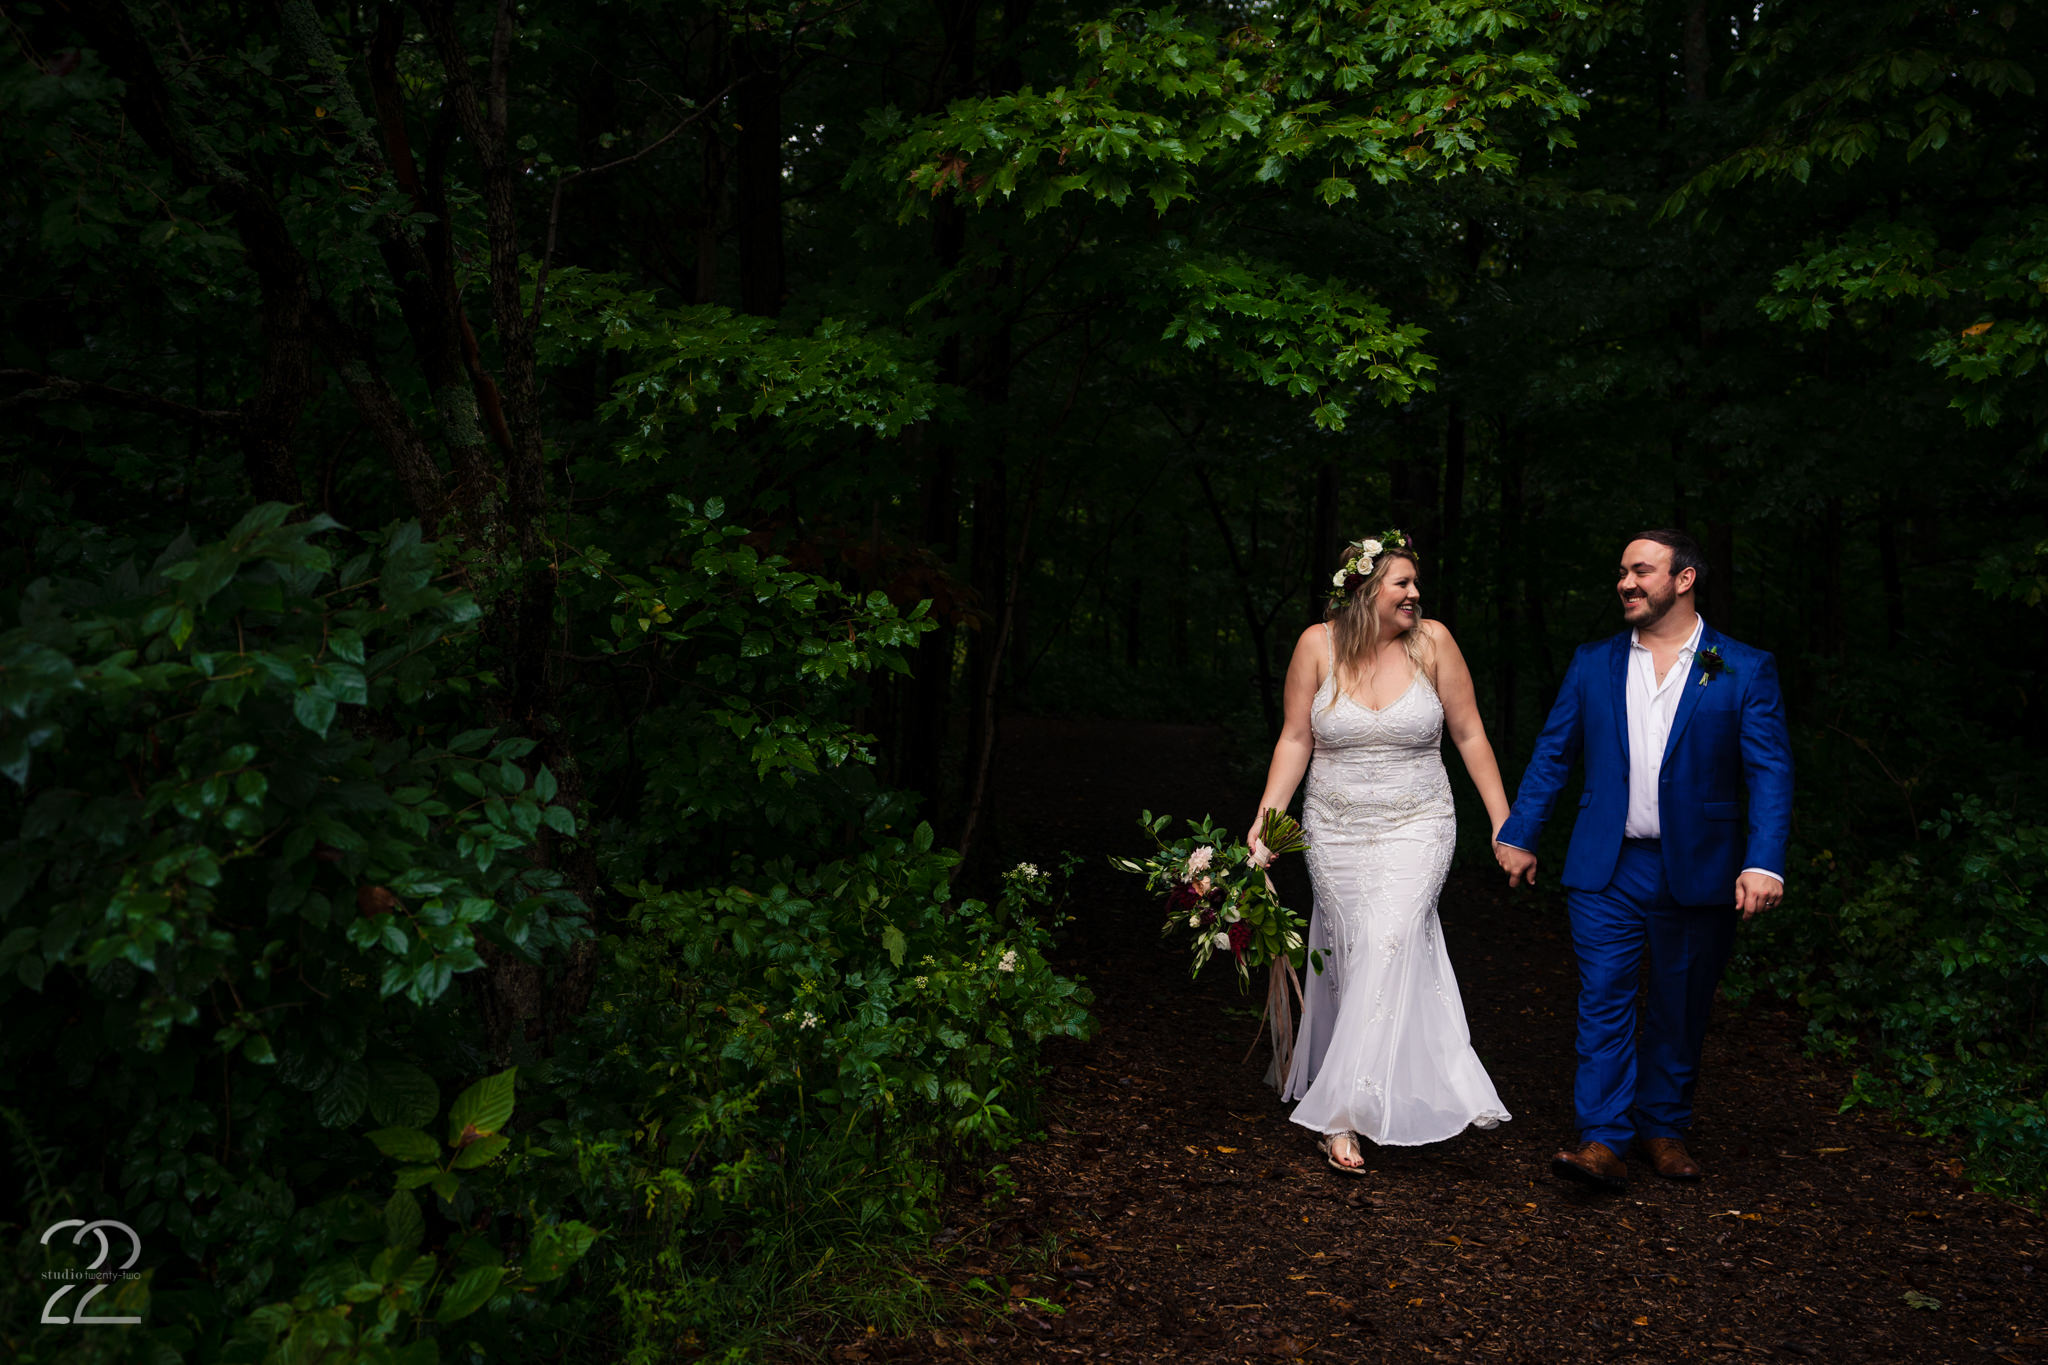  First steps into a new adventure as husband and wife. Megan adores capturing the little looks between the couple, as well as those in between moments (like walking from one photo location to another). 